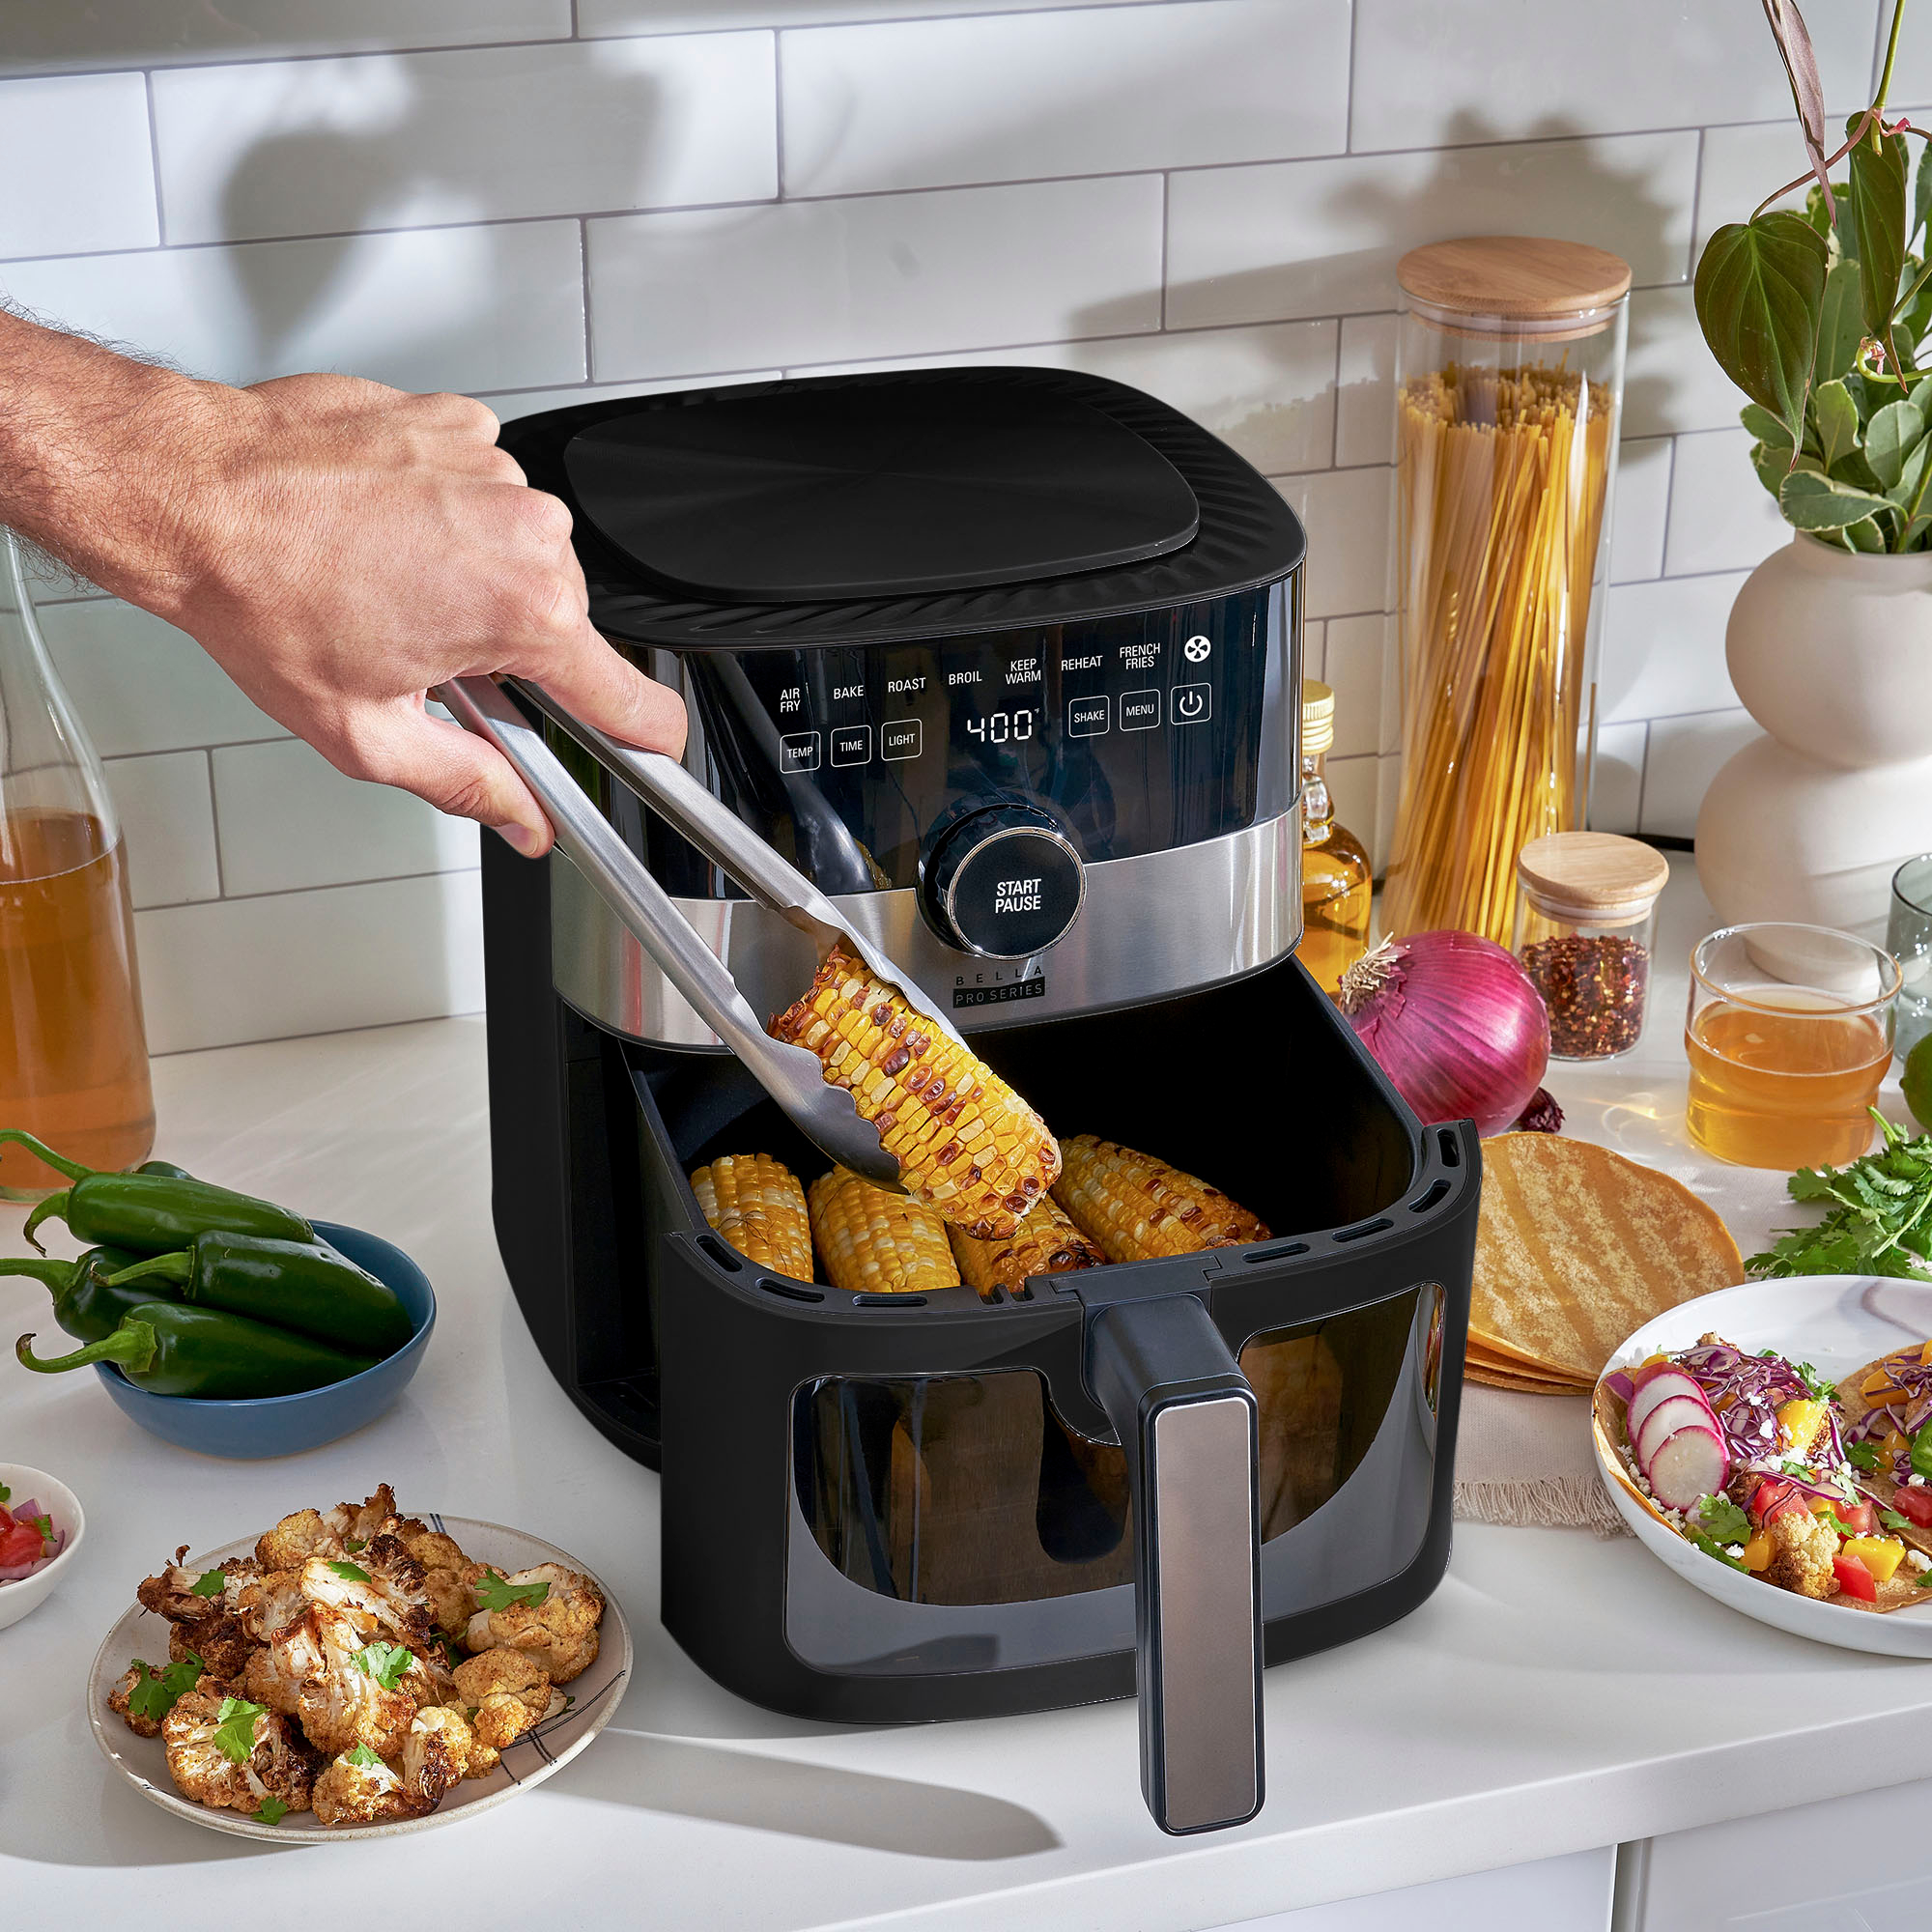 Bella Pro Series 8-Quart Digital Air Fryer Only $49.99 Shipped on